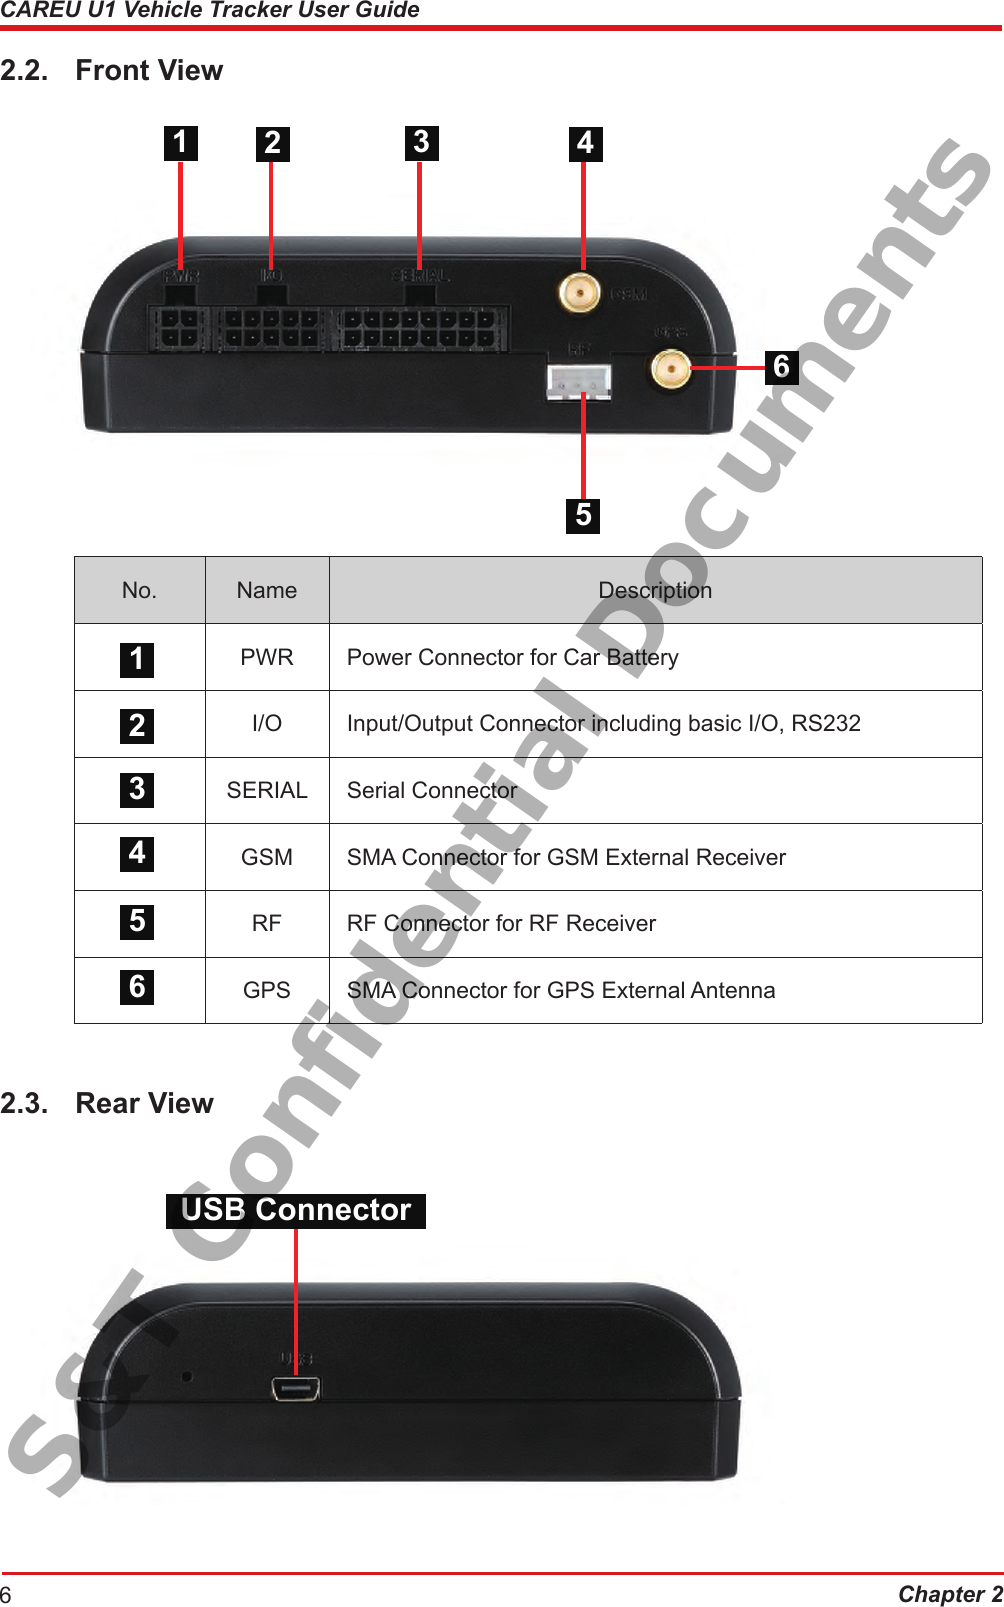 Chapter 26CAREU U1 Vehicle Tracker User Guide2.2.  Front View   No. Name DescriptionPWR Power Connector for Car BatteryI/O Input/Output Connector including basic I/O, RS232SERIAL Serial ConnectorGSM SMA Connector for GSM External ReceiverRF RF Connector for RF ReceiverGPS SMA Connector for GPS External Antenna2.3.  Rear View1142536234USB Connector56S&amp;T Confidential Documents